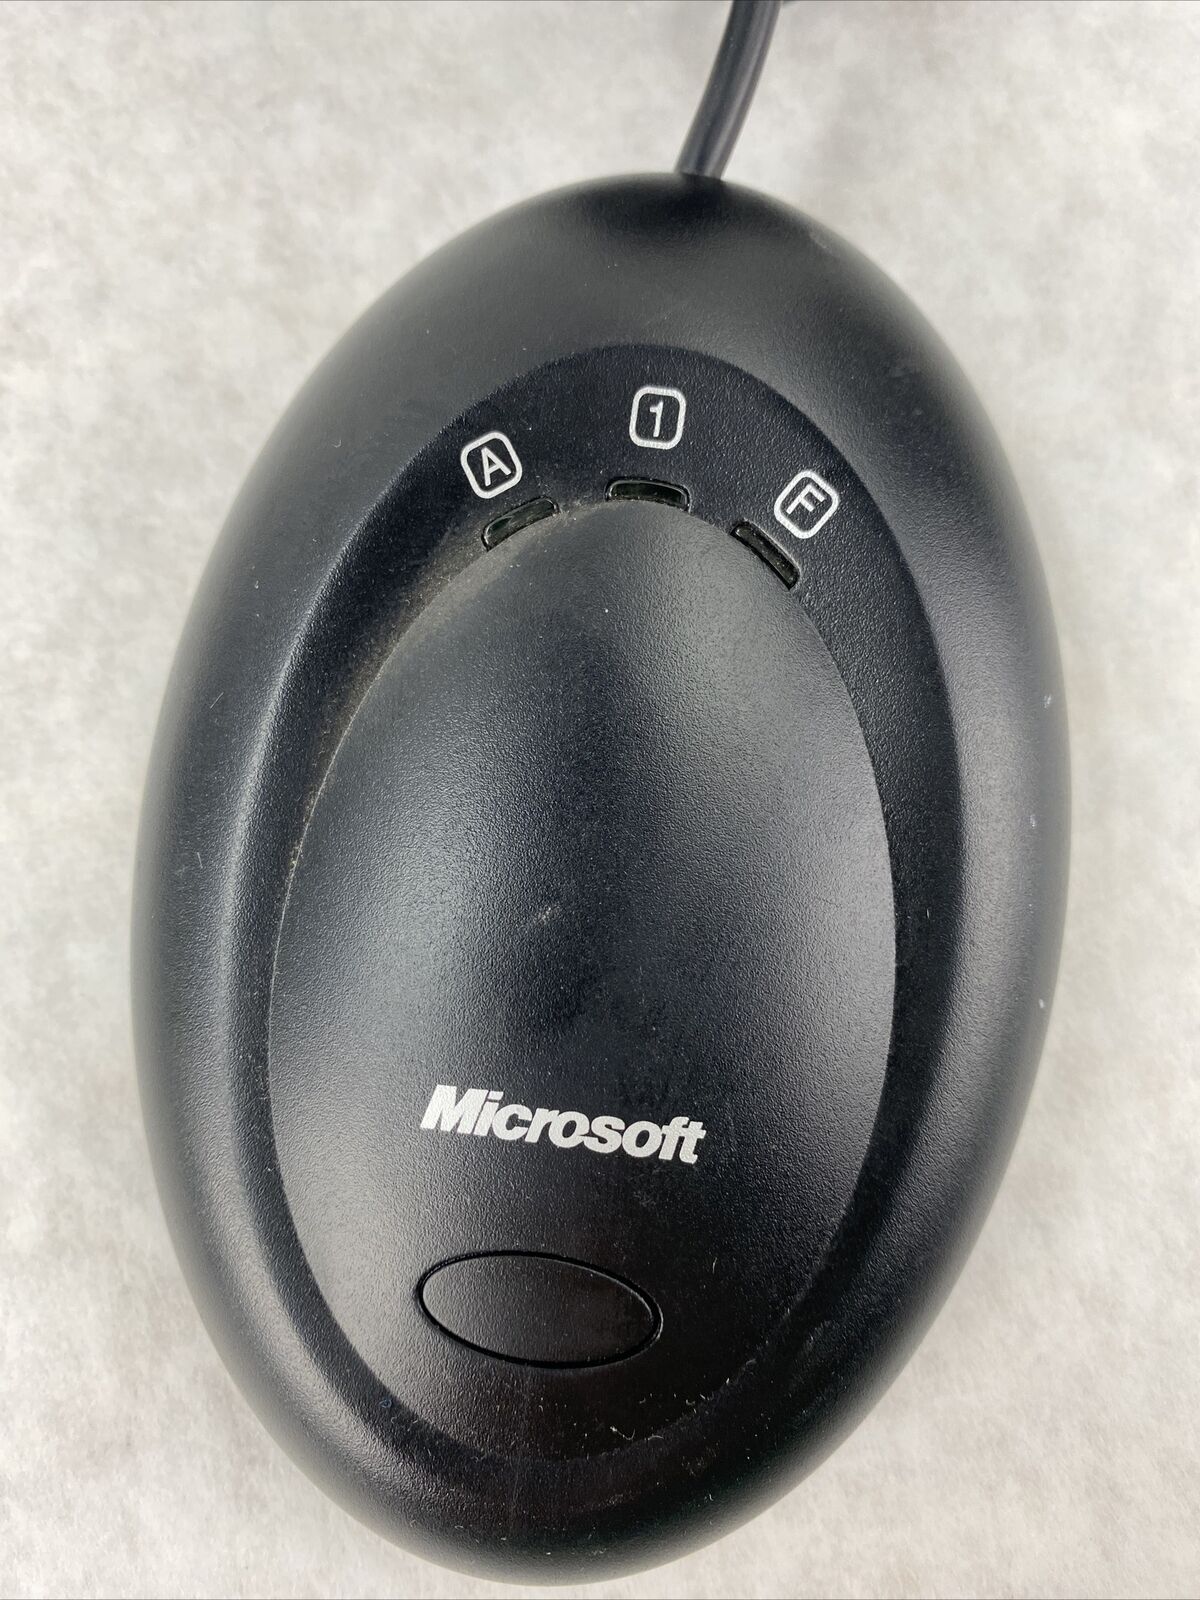 Microsoft 1028 X806603-005 USB Wireless Optical Mouse Receiver 3.1 ONLY